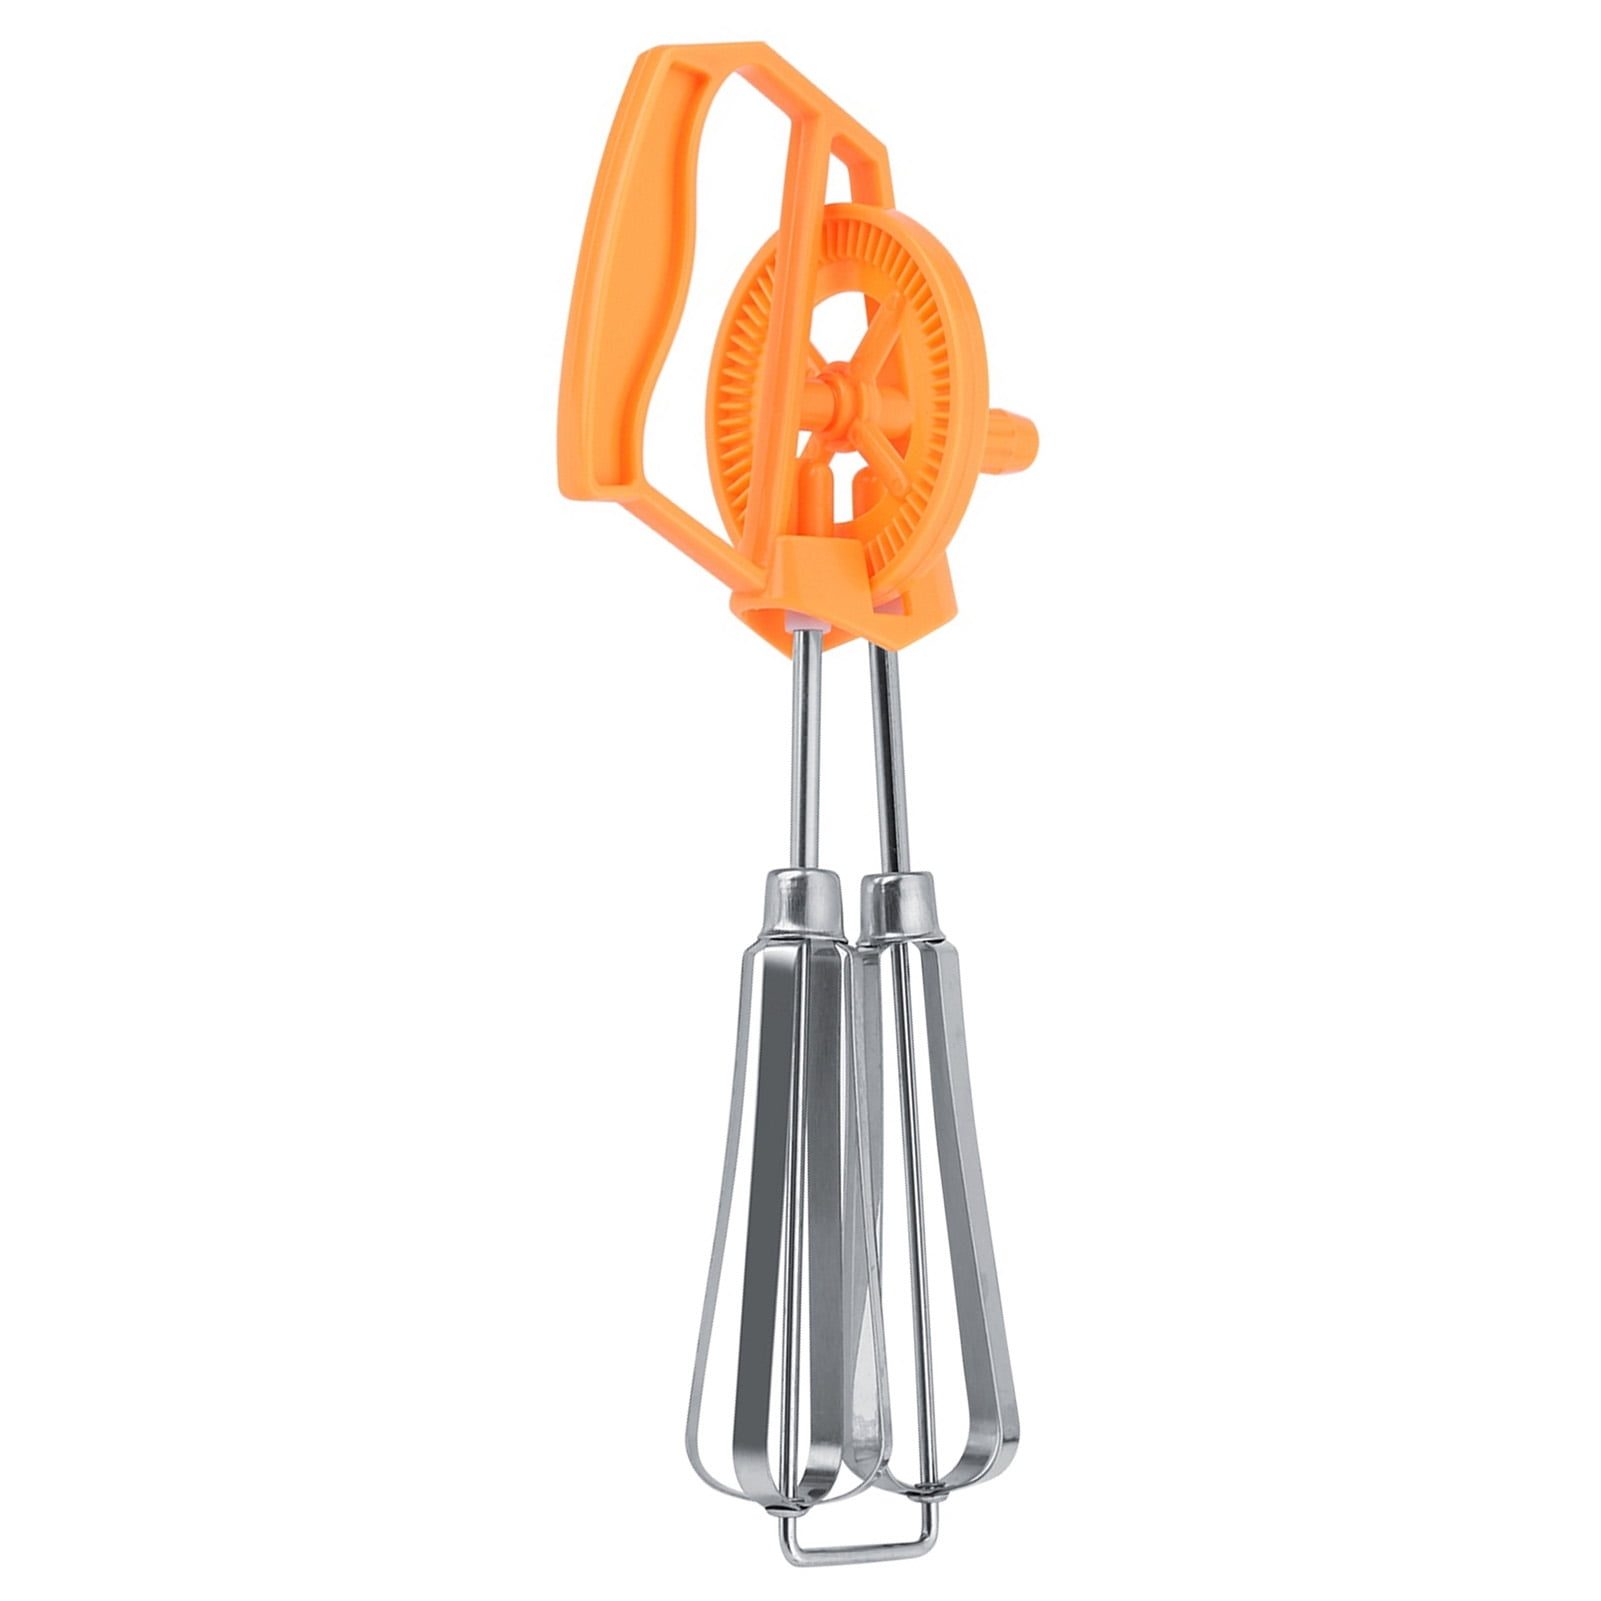  Manual Hand Mixer Easy Operation Stainless Steel Hand Crank Auto Rotation  For Kitchen White,Orange